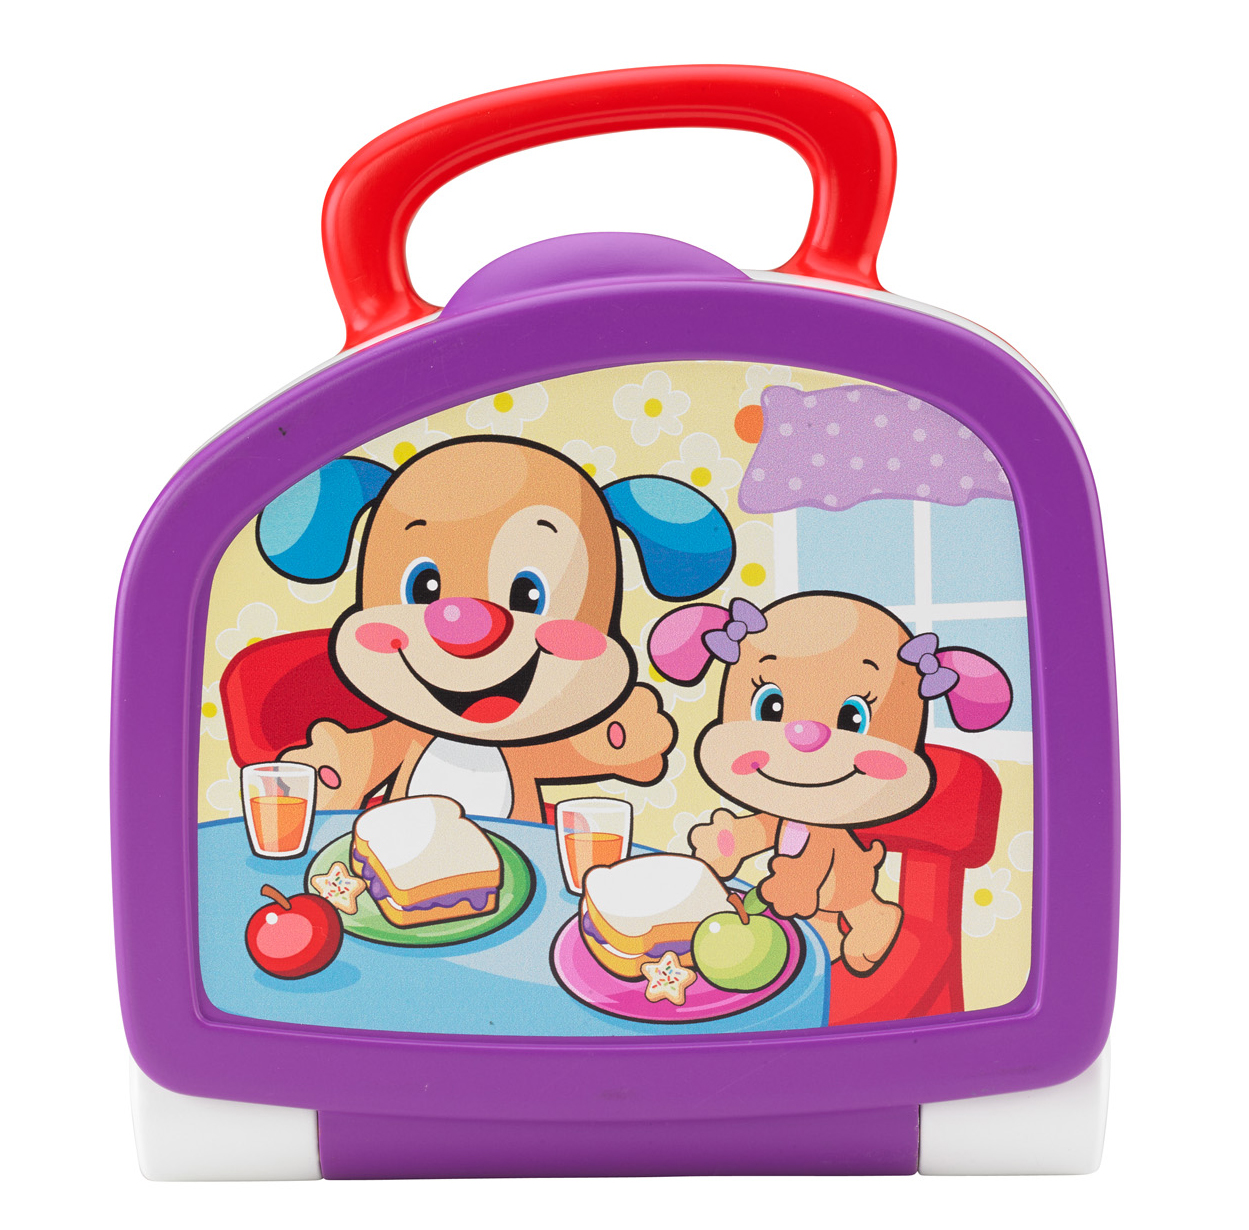 Fisher-Price Laugh & Learn Sort 'n Learn Lunchbox - image 2 of 14